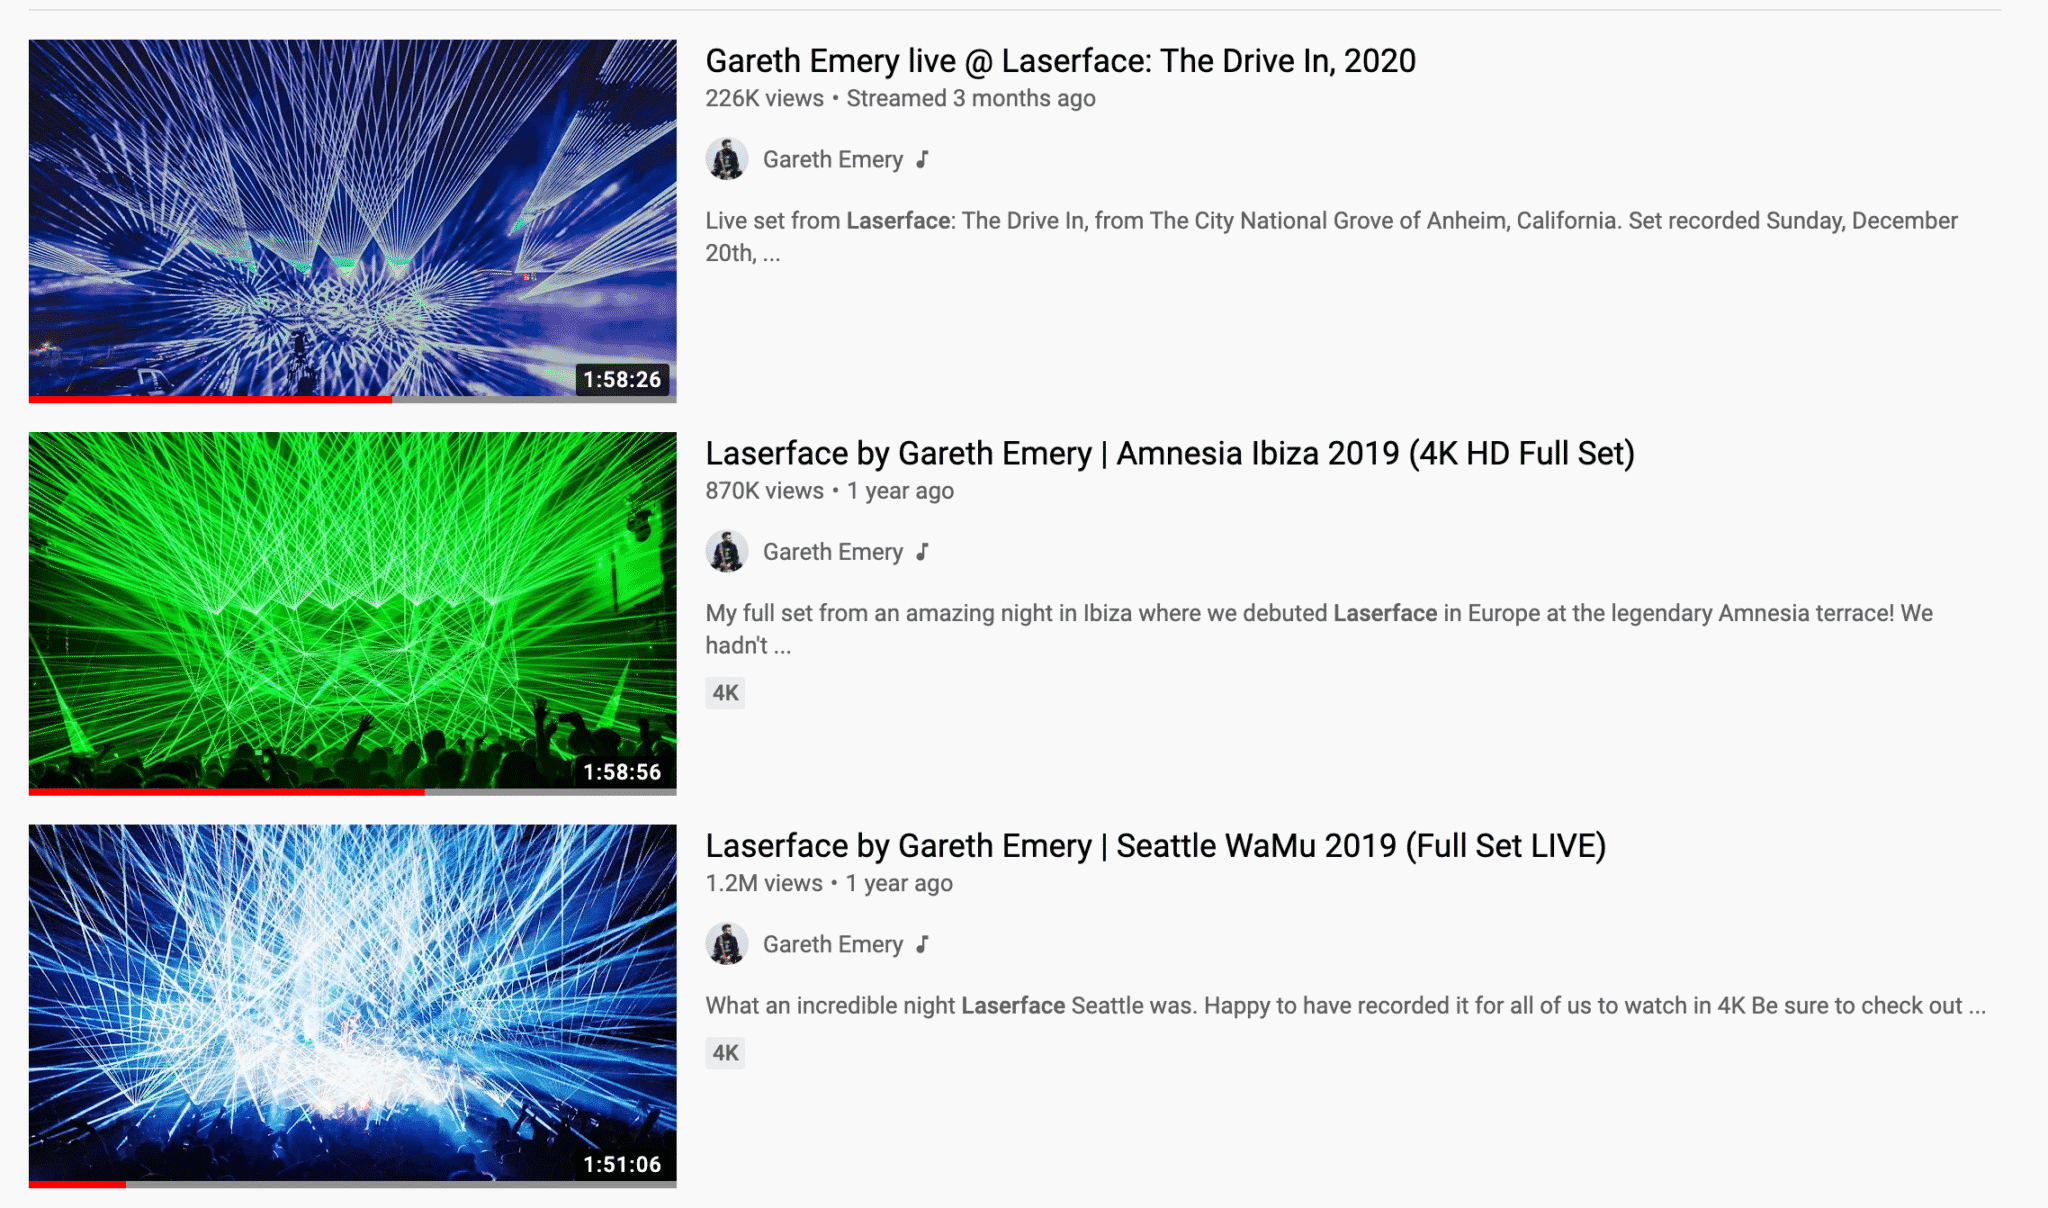 Gareth Emery laserface shows on youtube